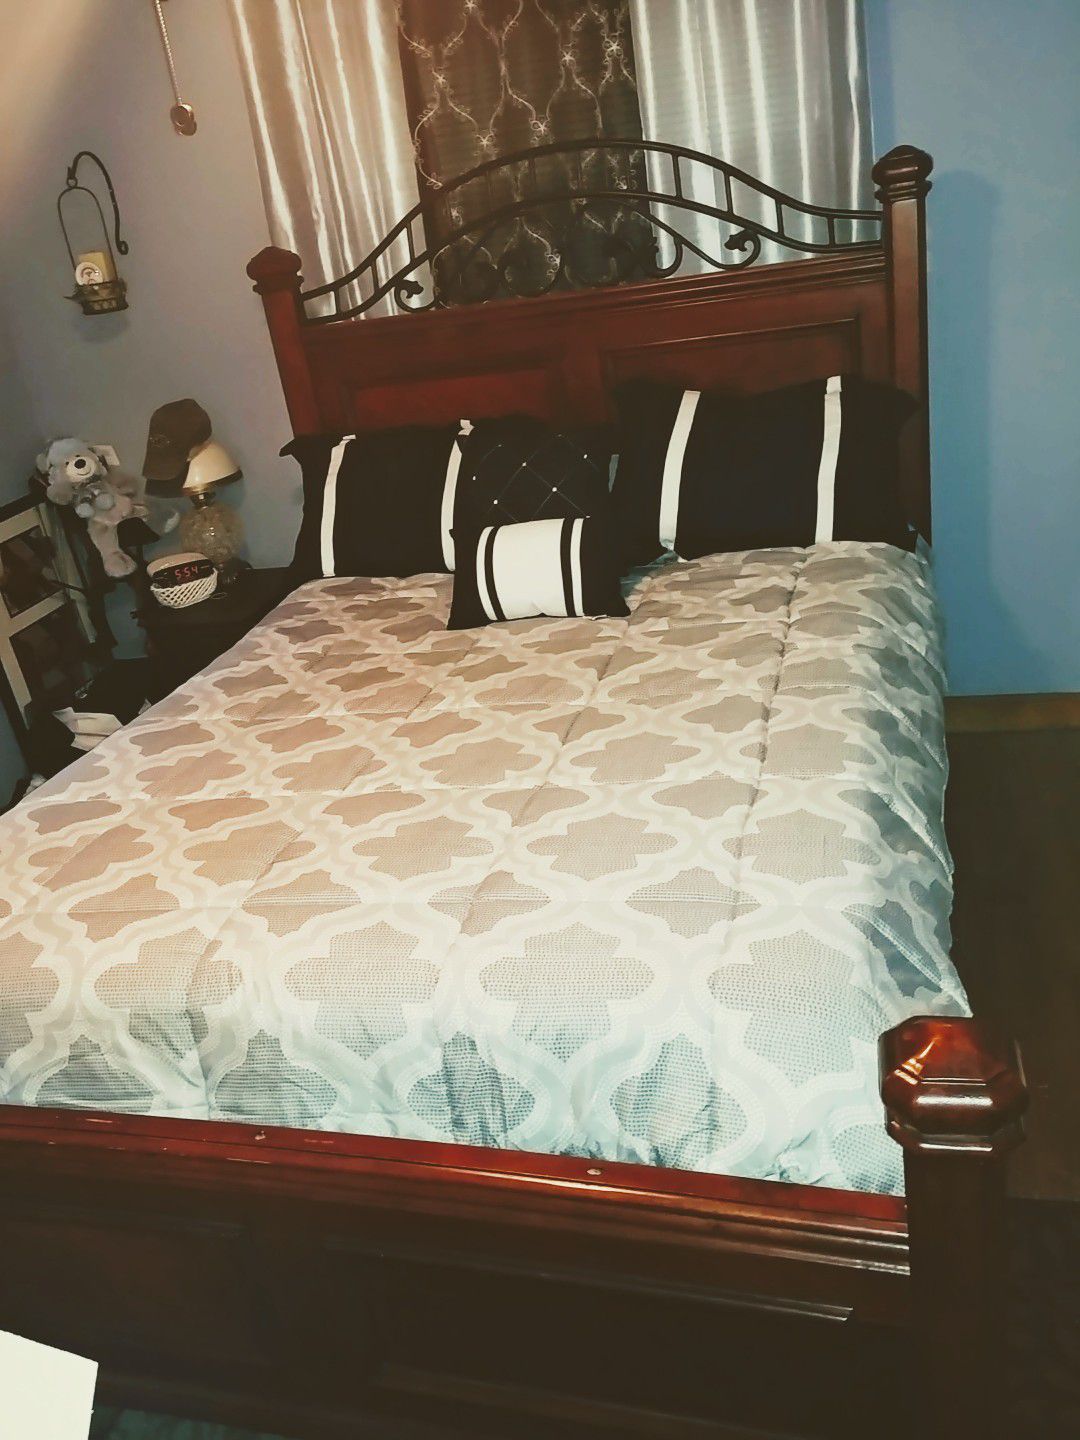 Queen bed and dresser in excellent condition